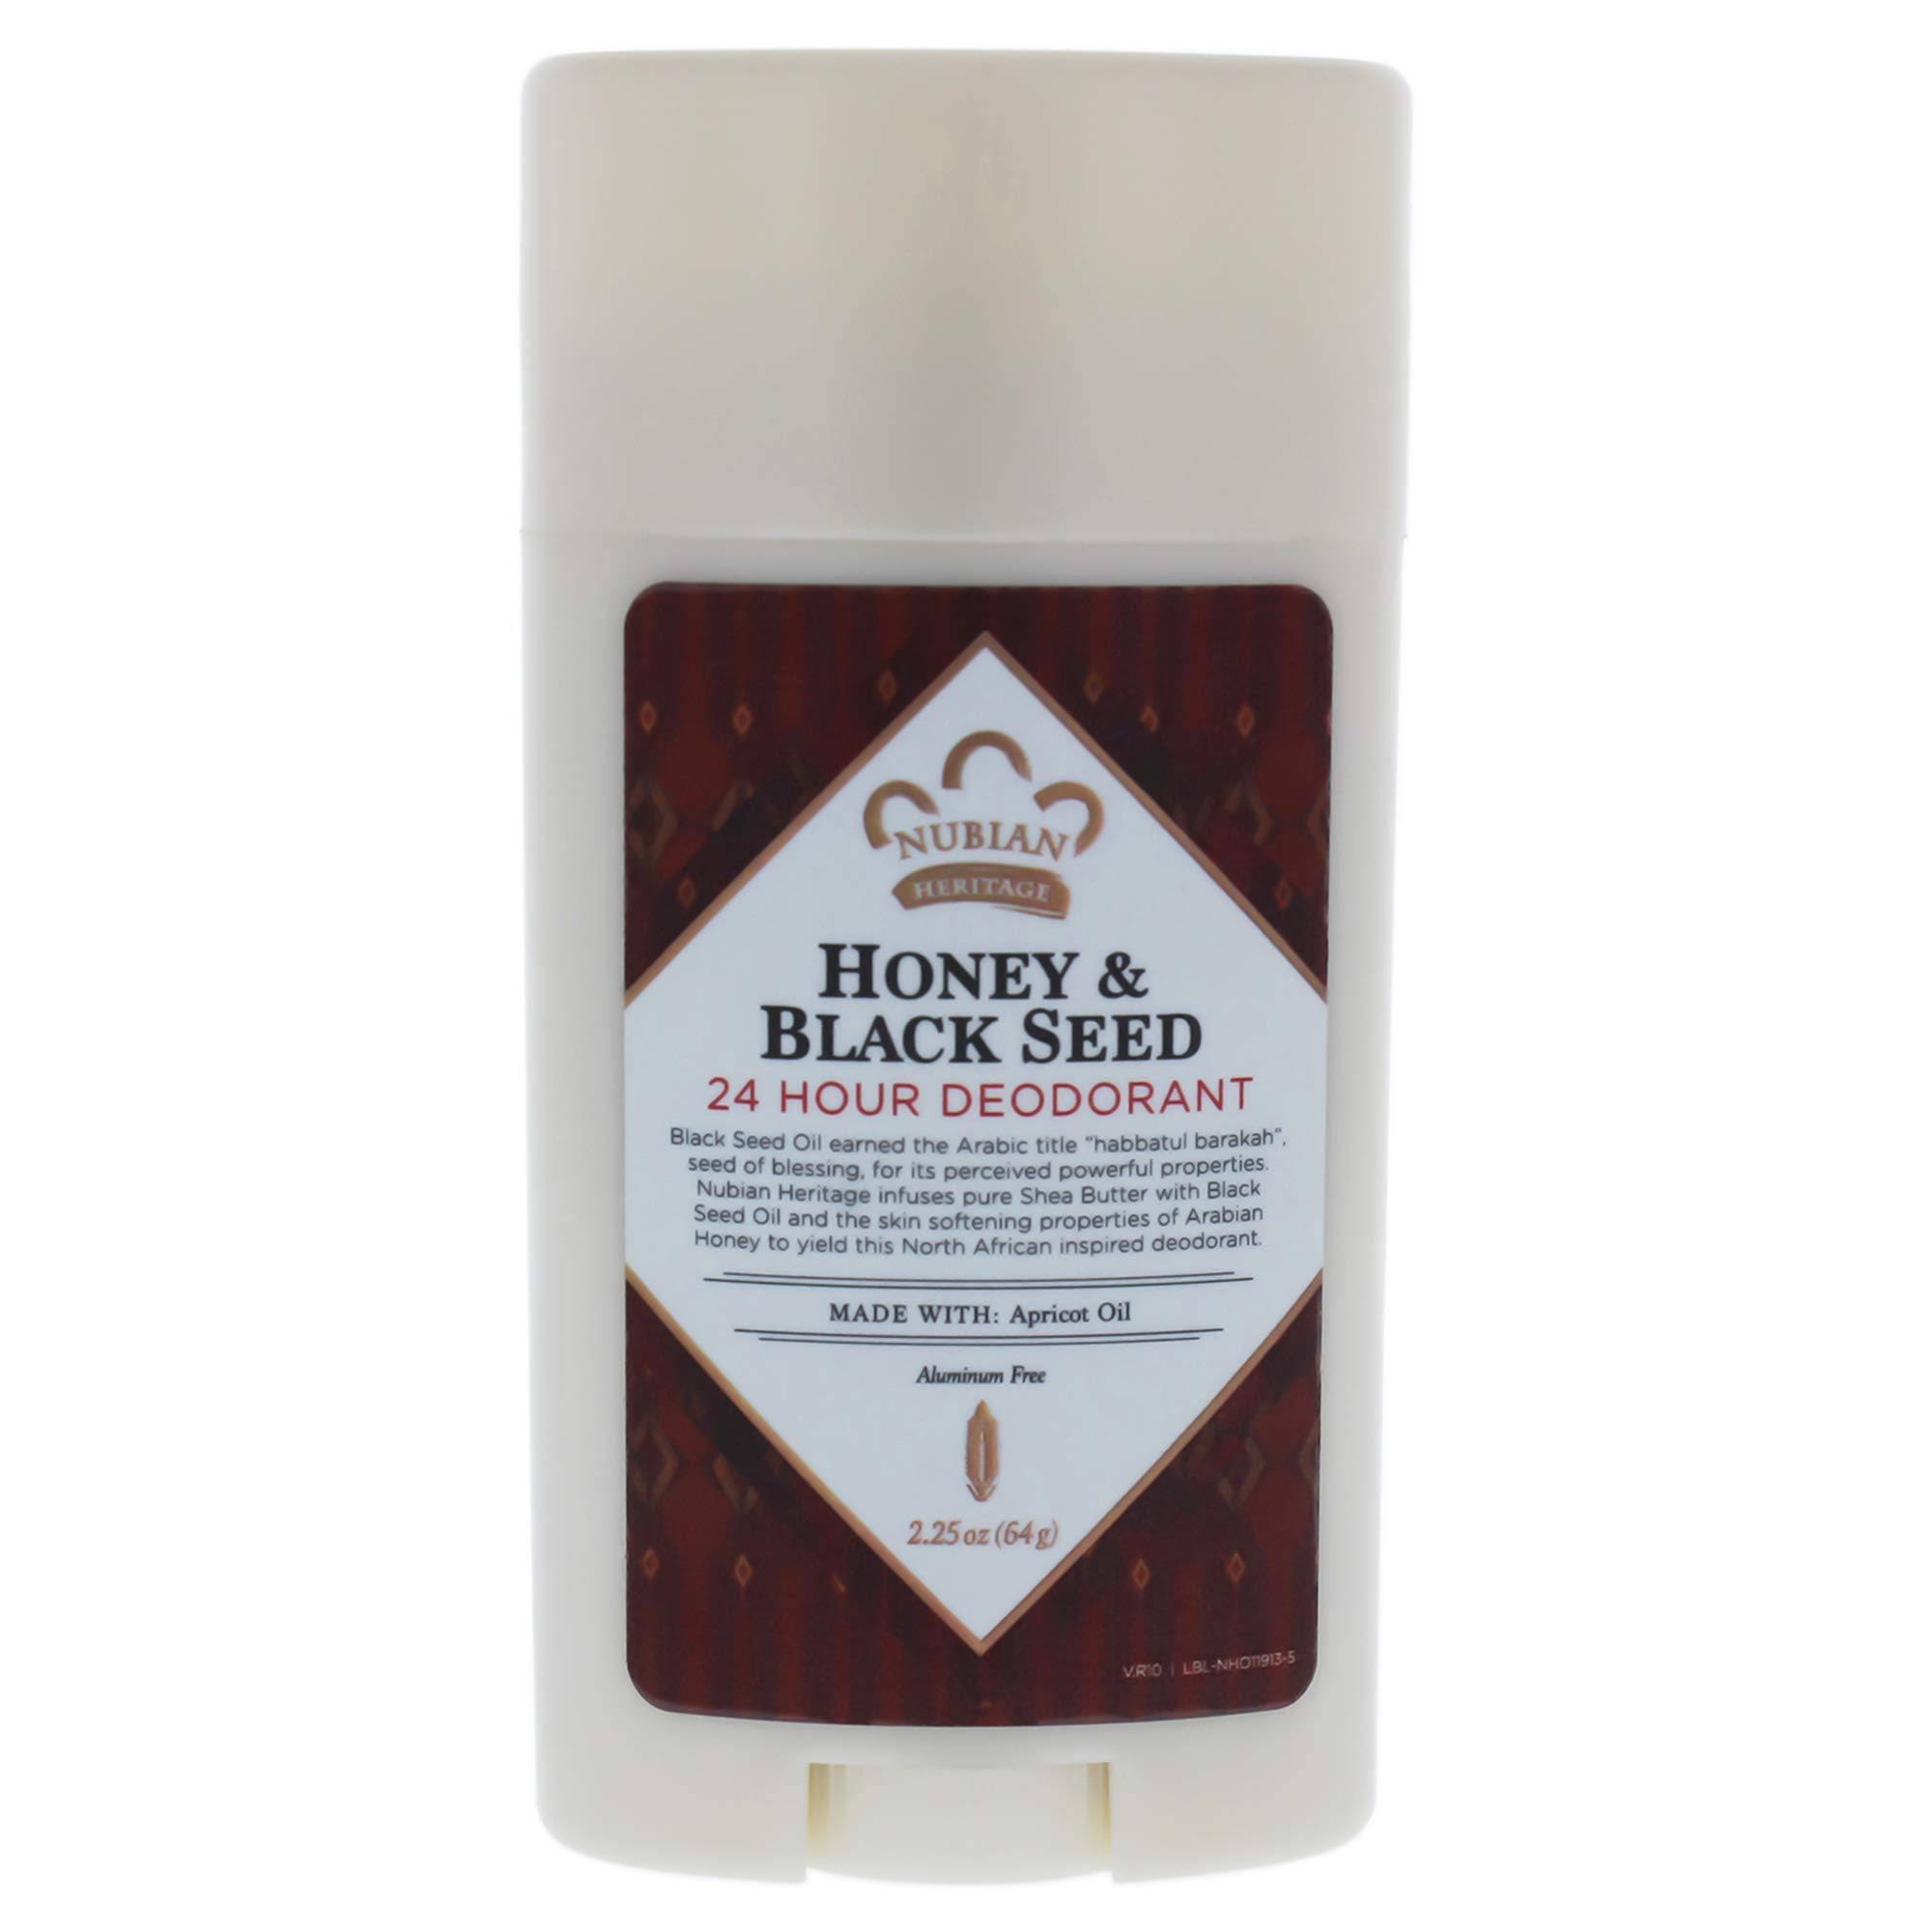 Nubian Heritage 24 Hour All-natural Deodorant - Honey and Black Seed, 2.25oz